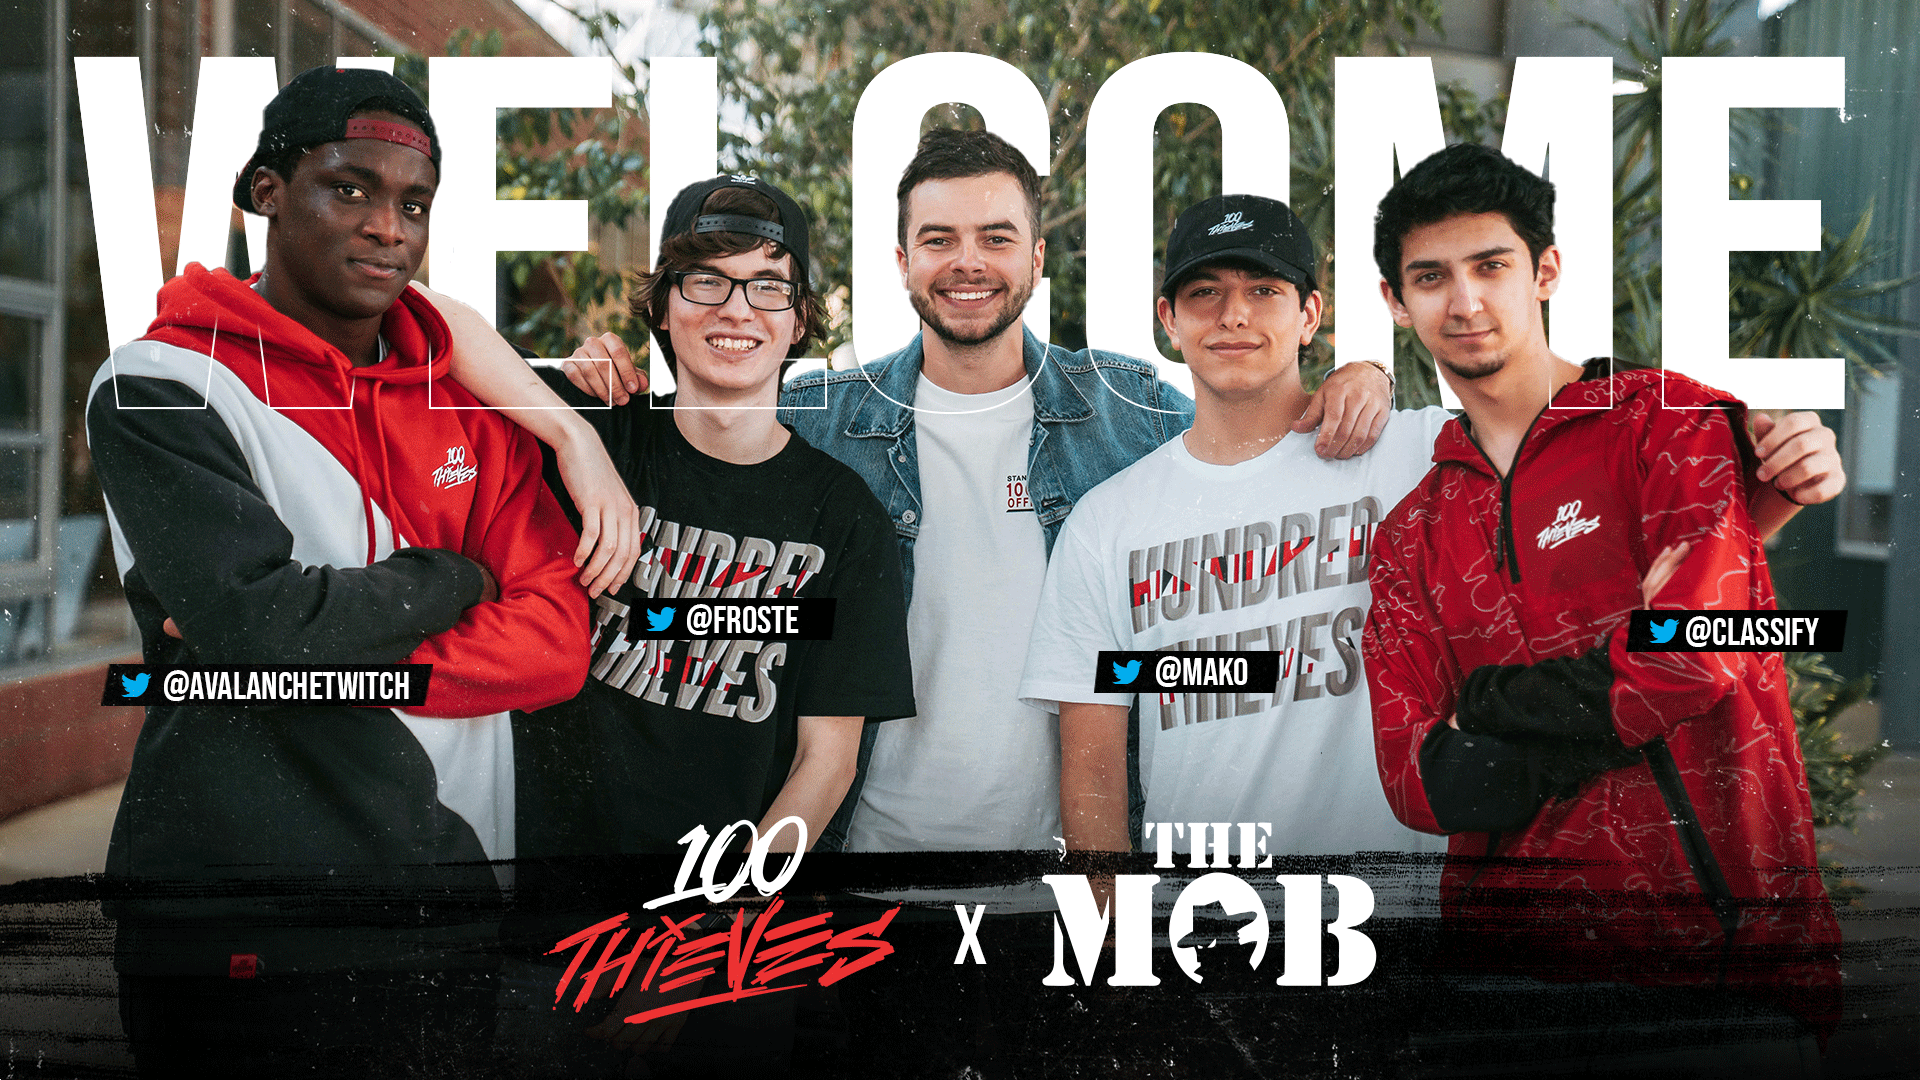 Featured image for “Froste & Nadeshot trade blows over 100 Thieves handling of The Mob”